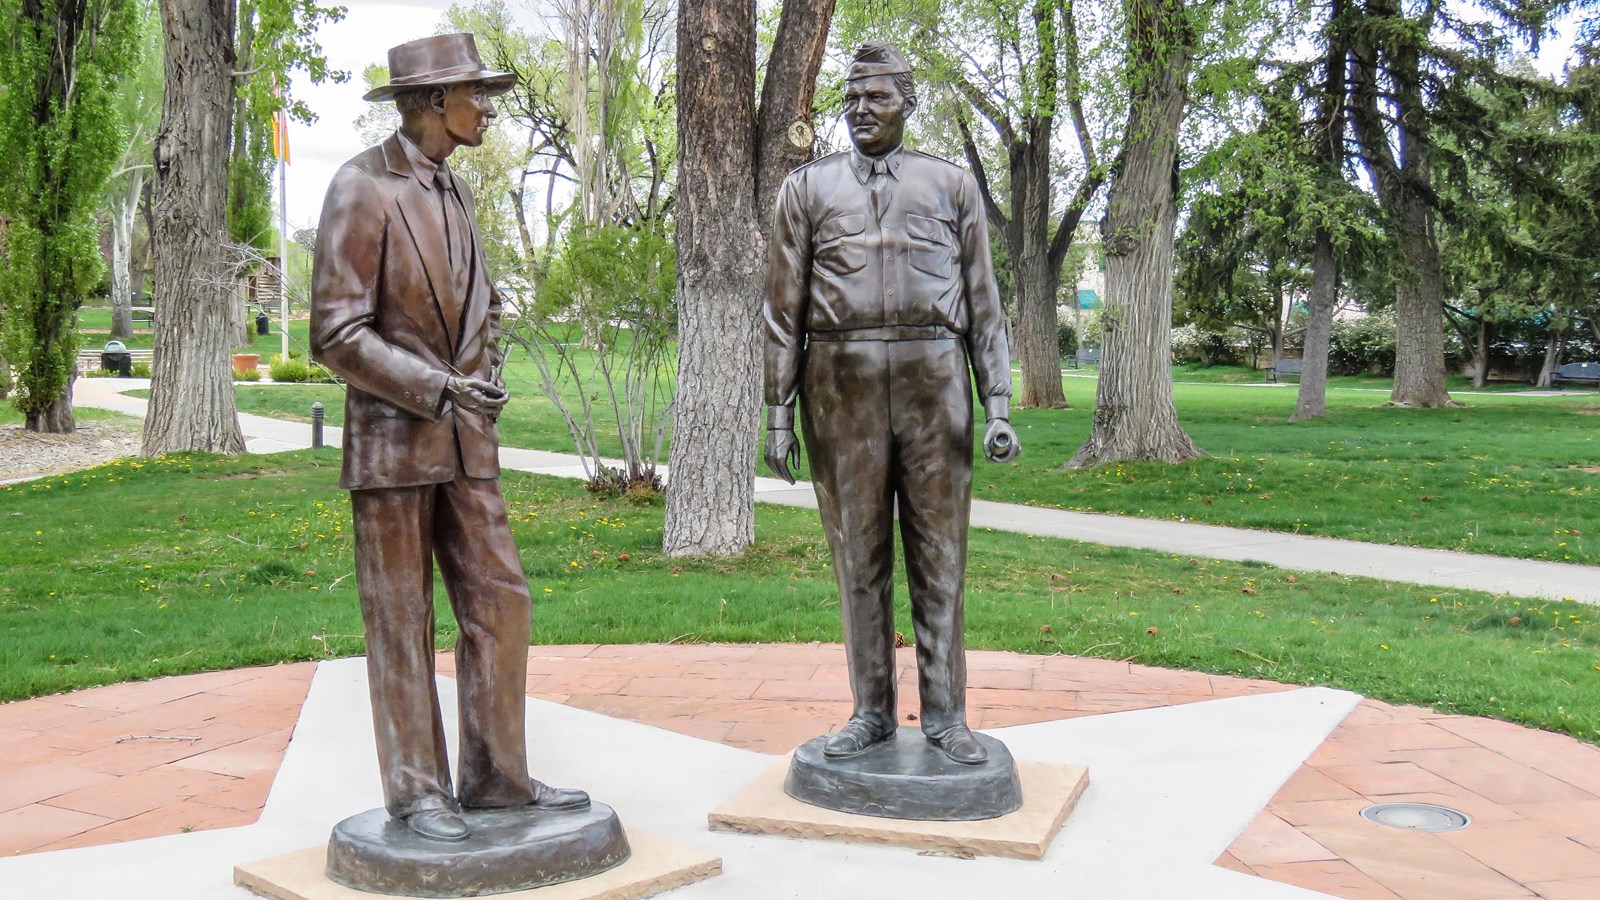 Bronze statues of two men stand on a concrete pad